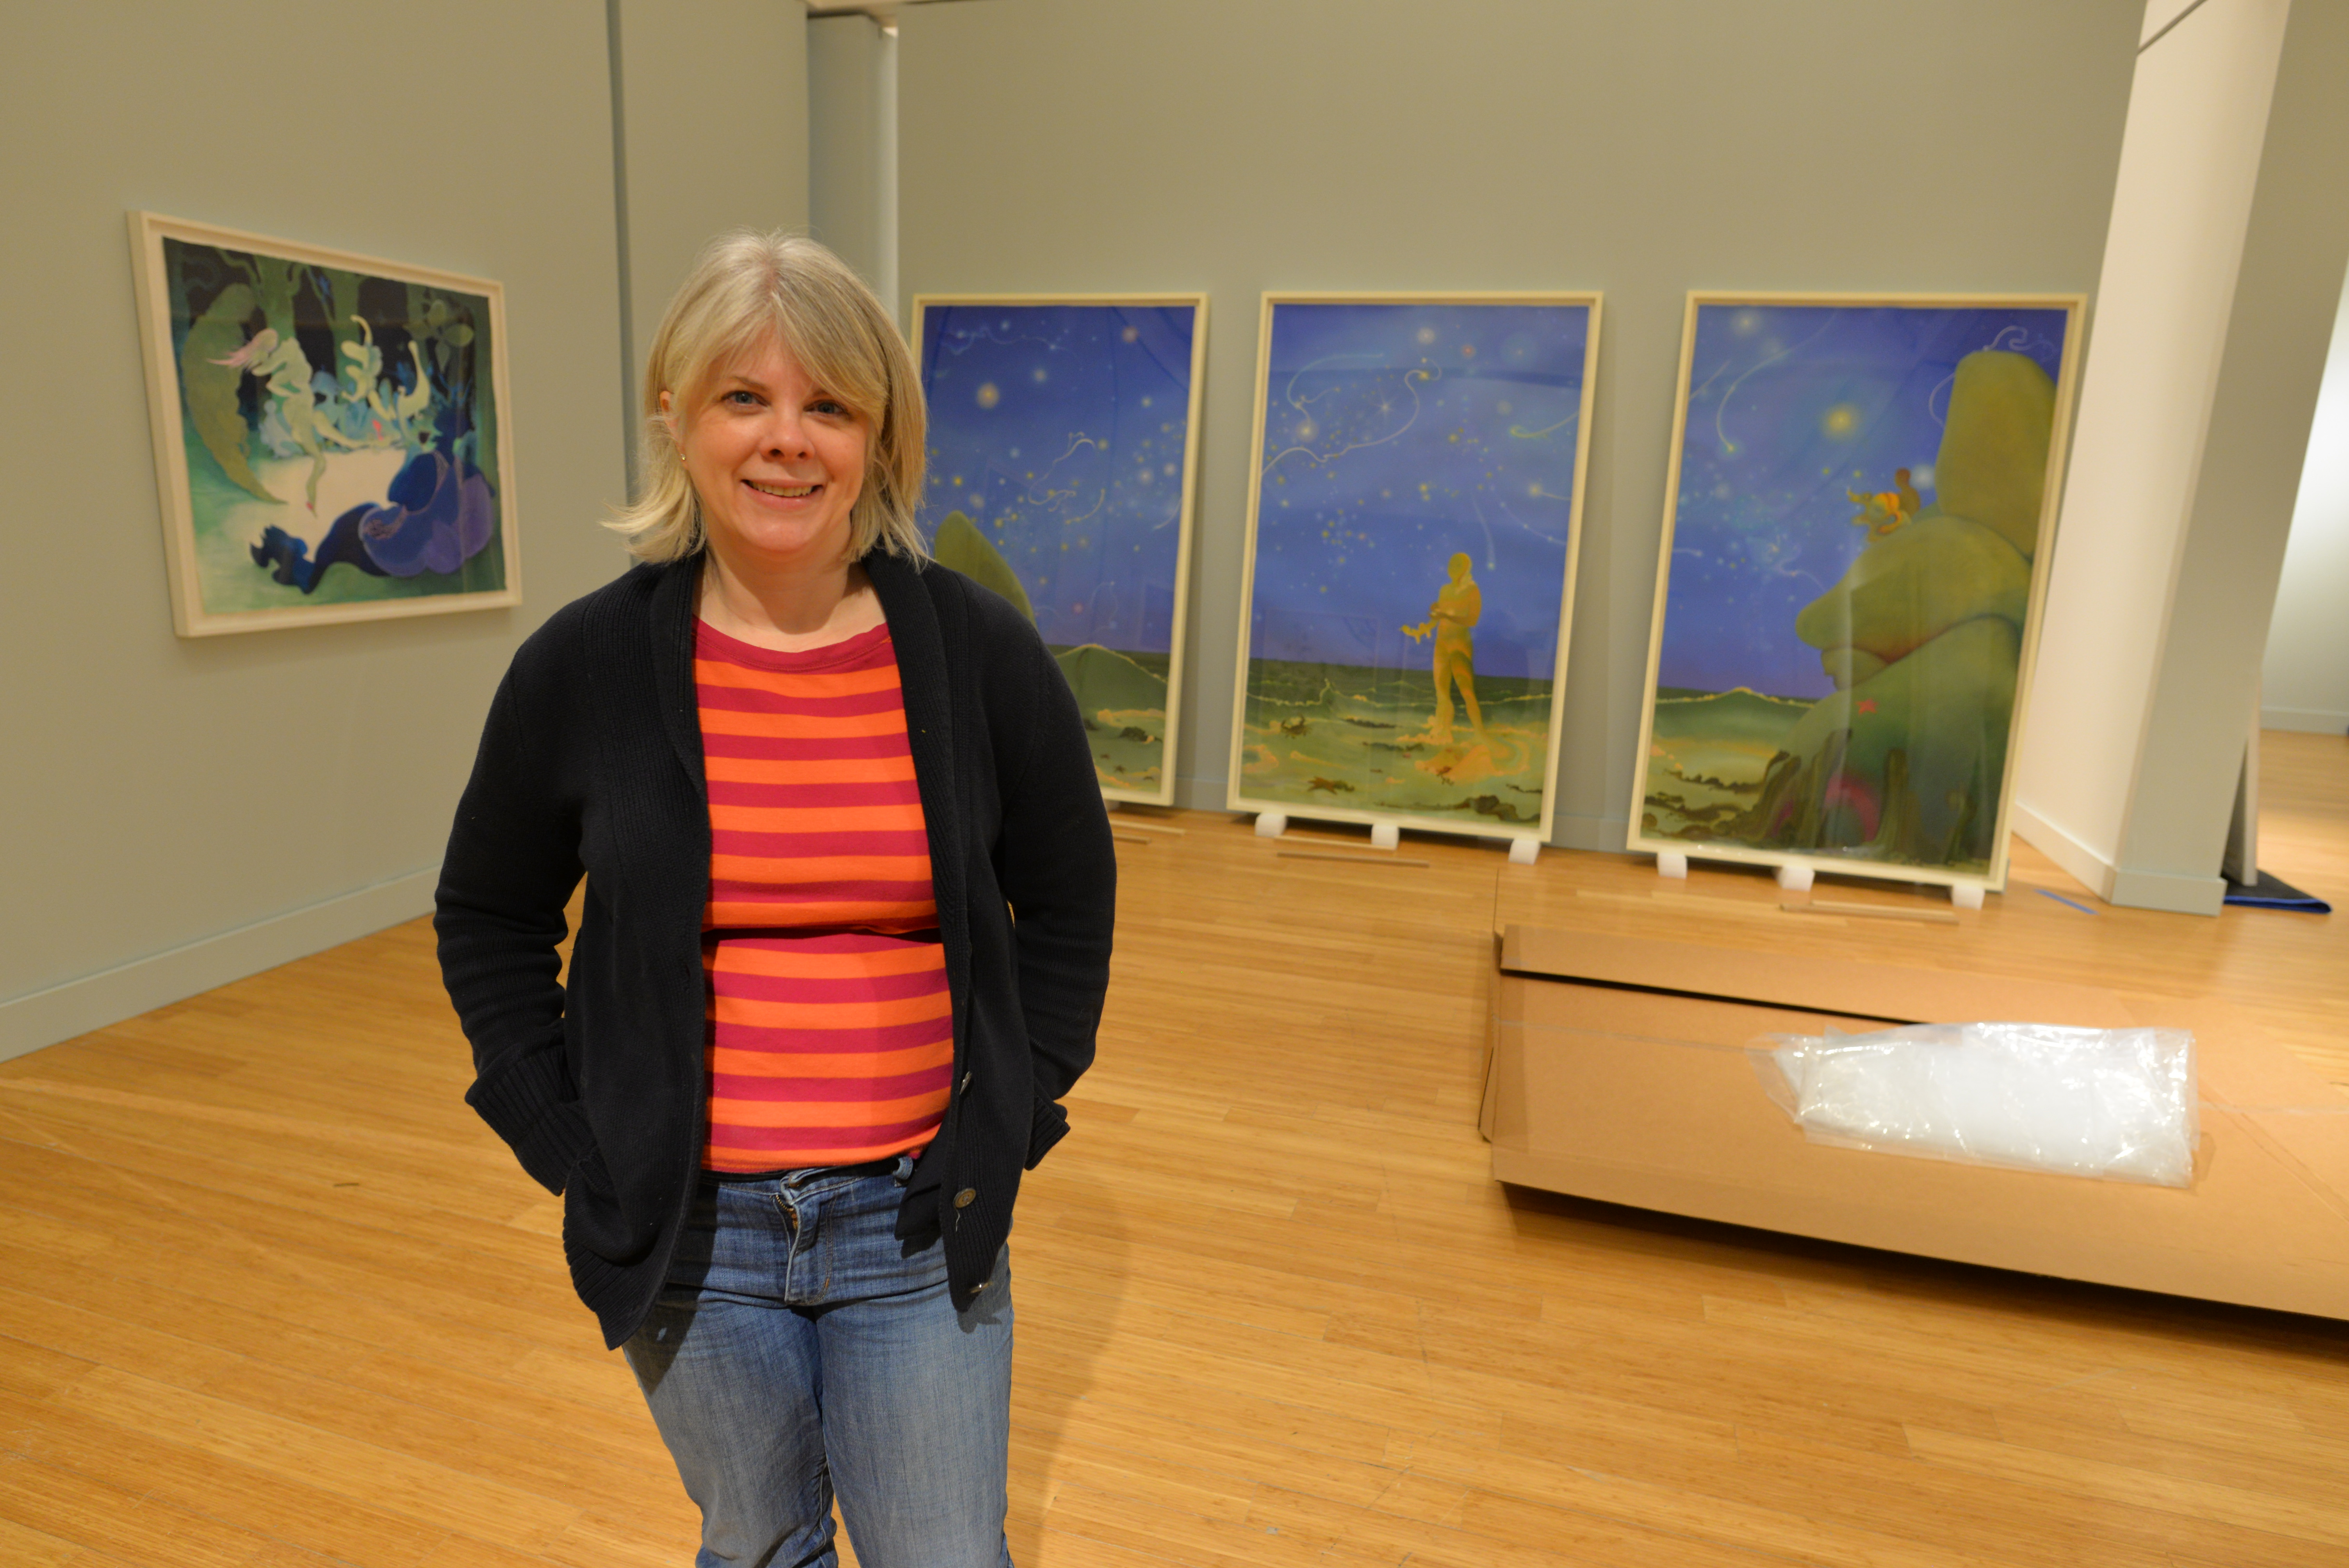 Essenhigh’s Whimsical World Comes in MOCA